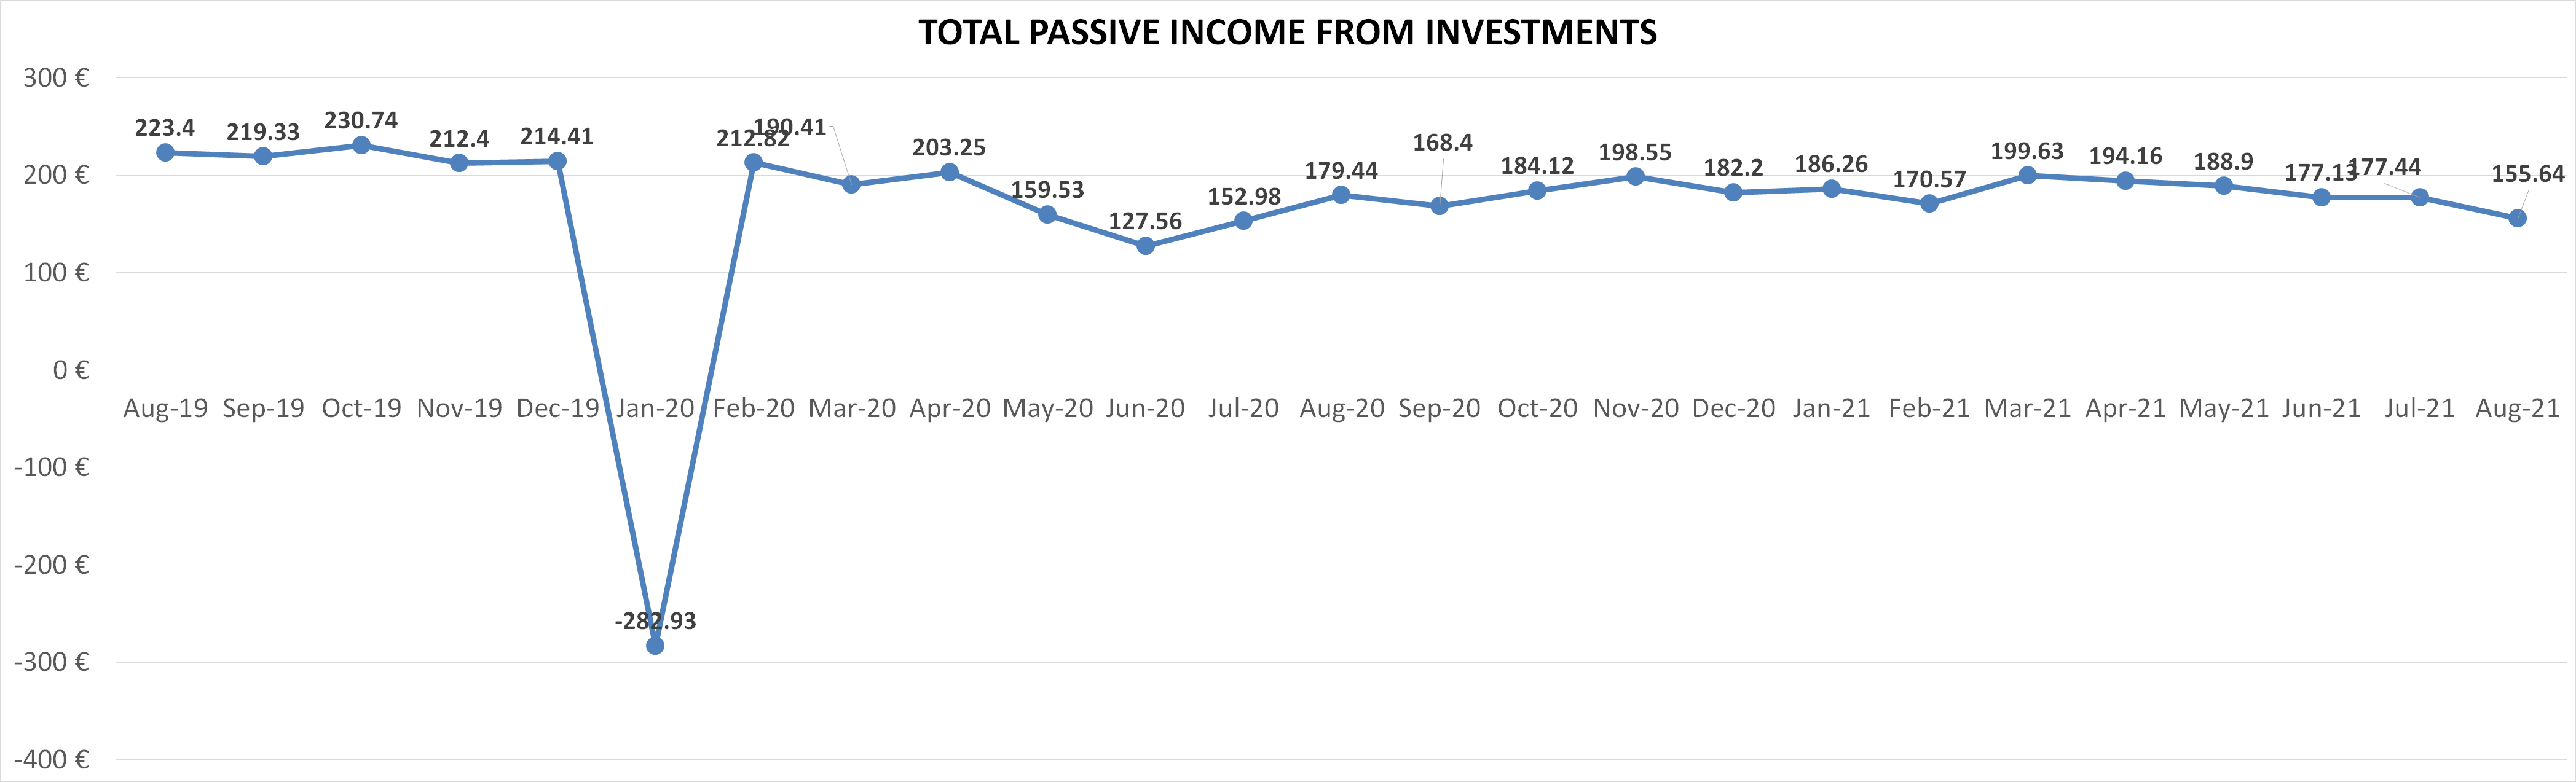 Total passive income from investments august 2021